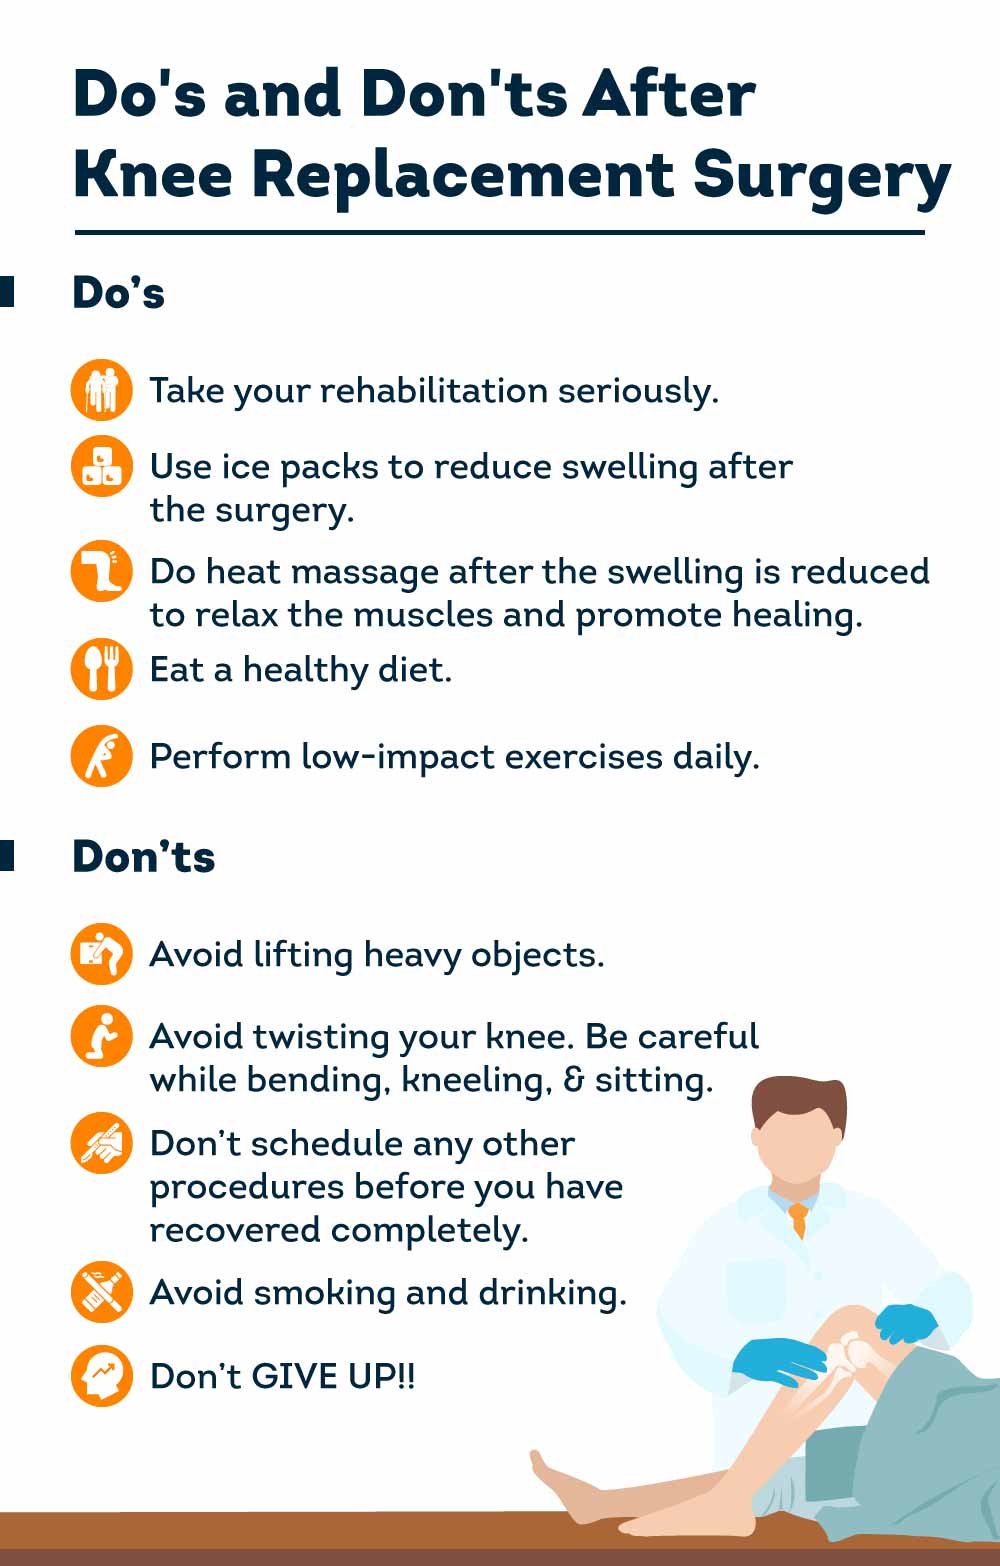 Do's and Don'ts after knee replacement surgery